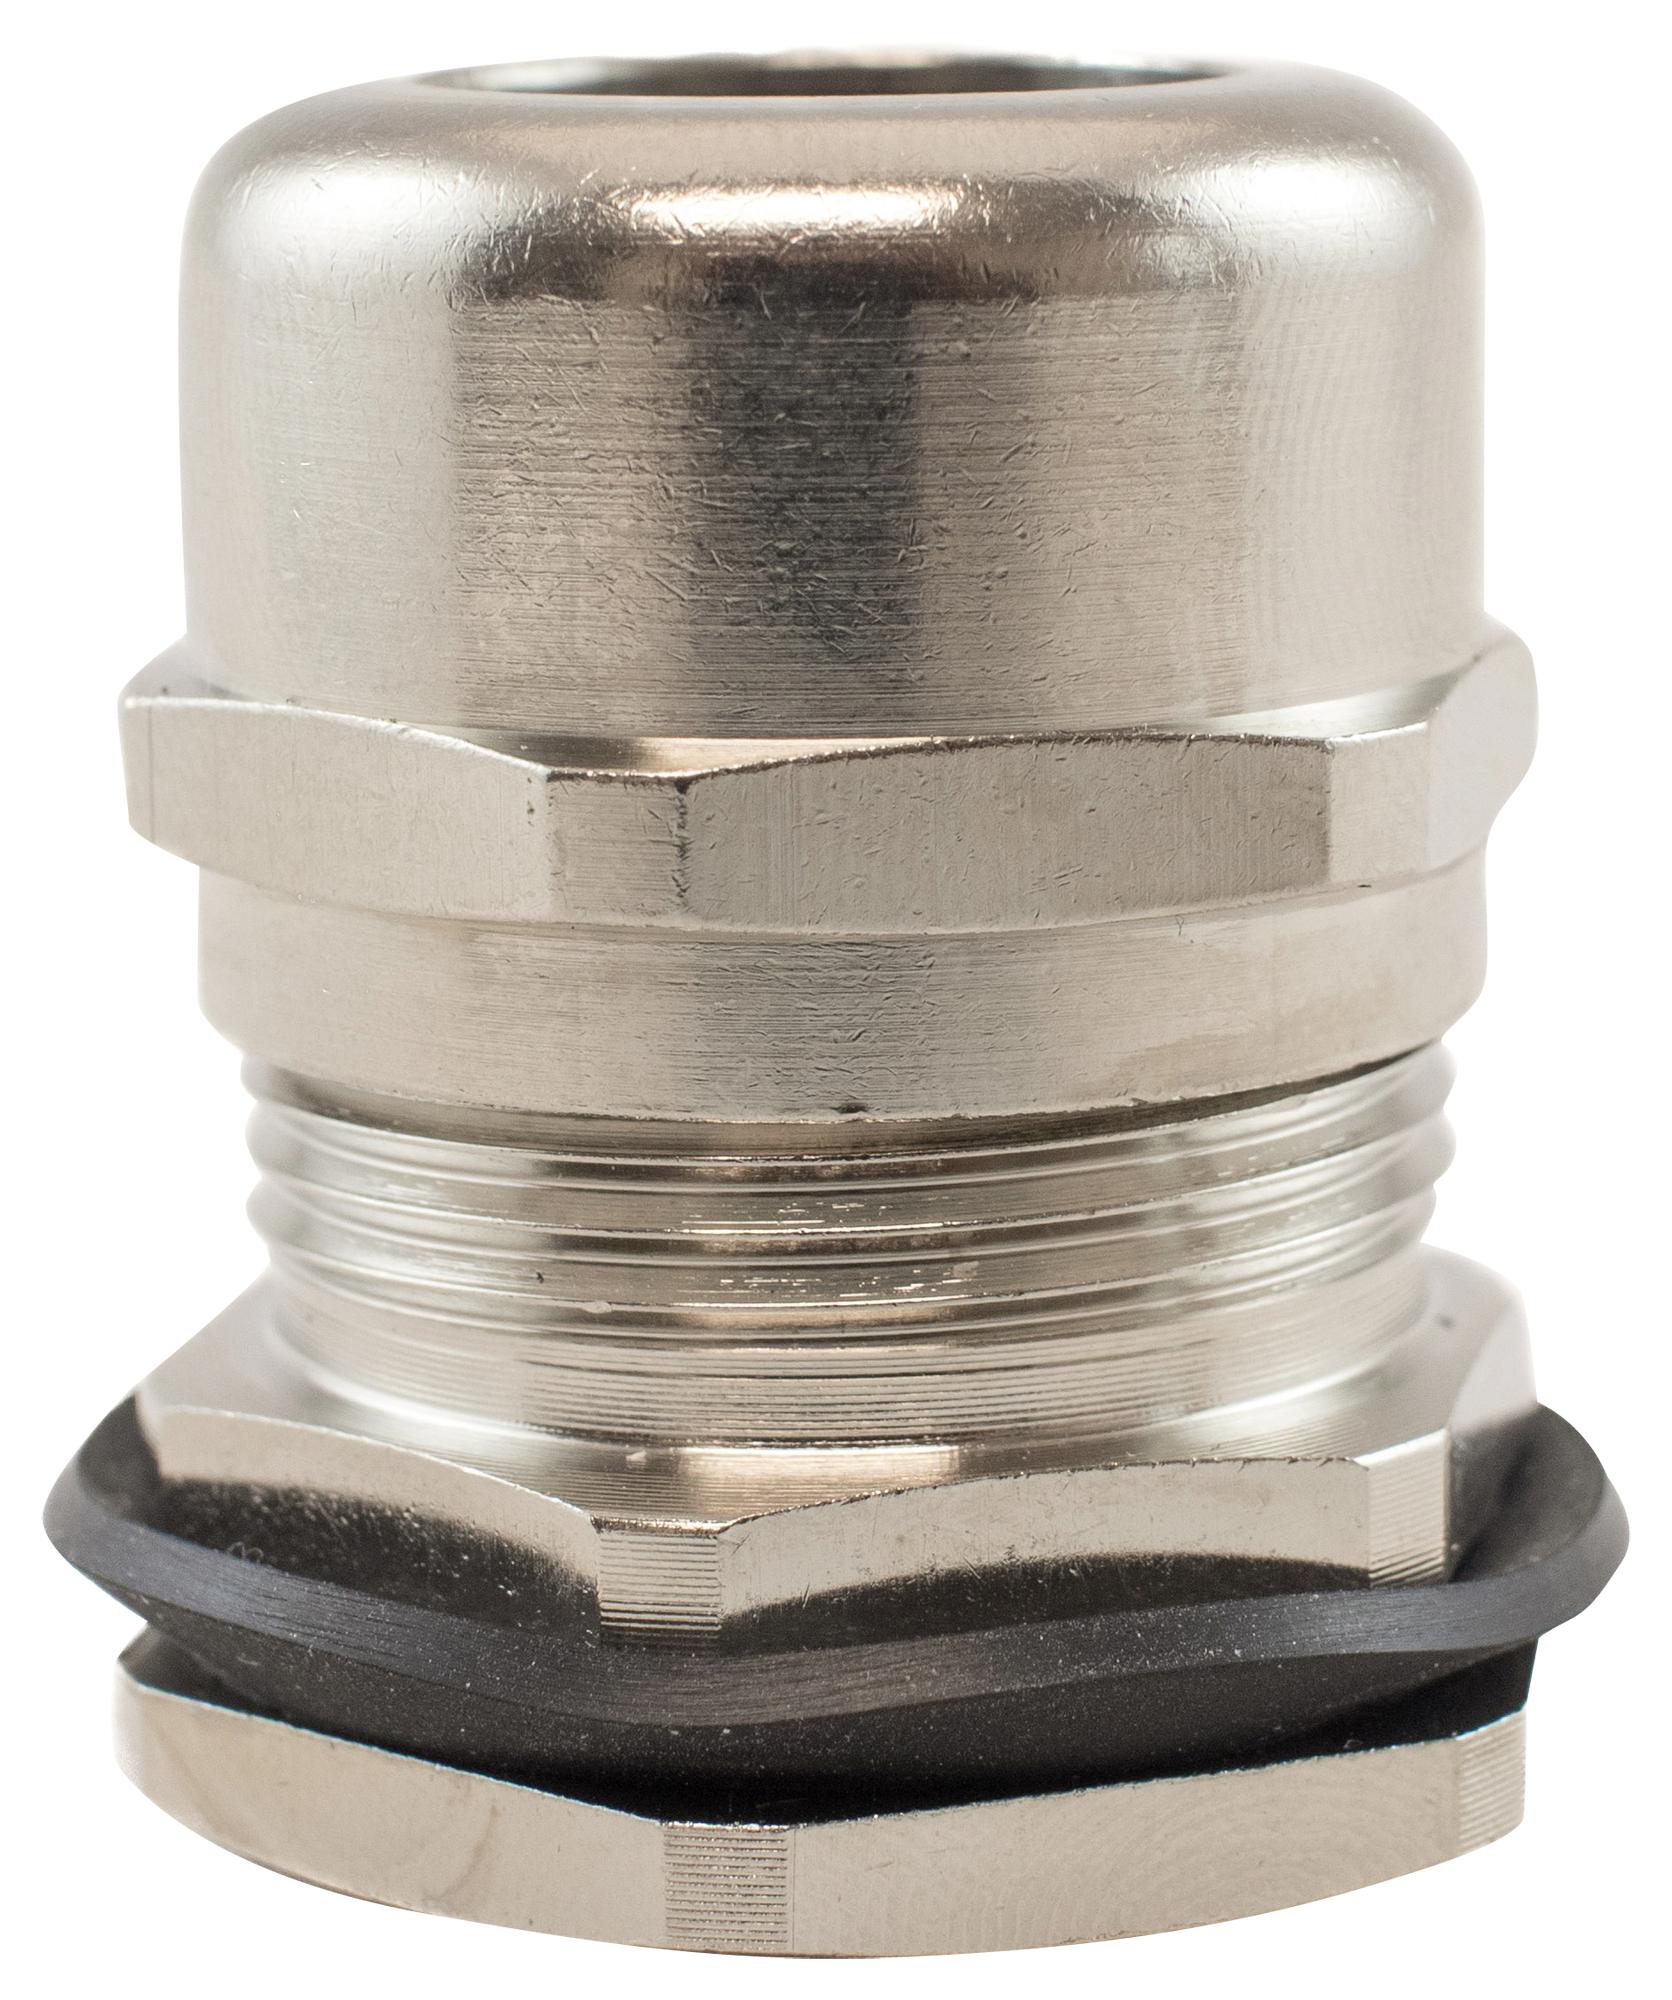 MES32 NC080 CABLE GLAND, M32X1.5, BRASS, 15-21MM ALPHA WIRE